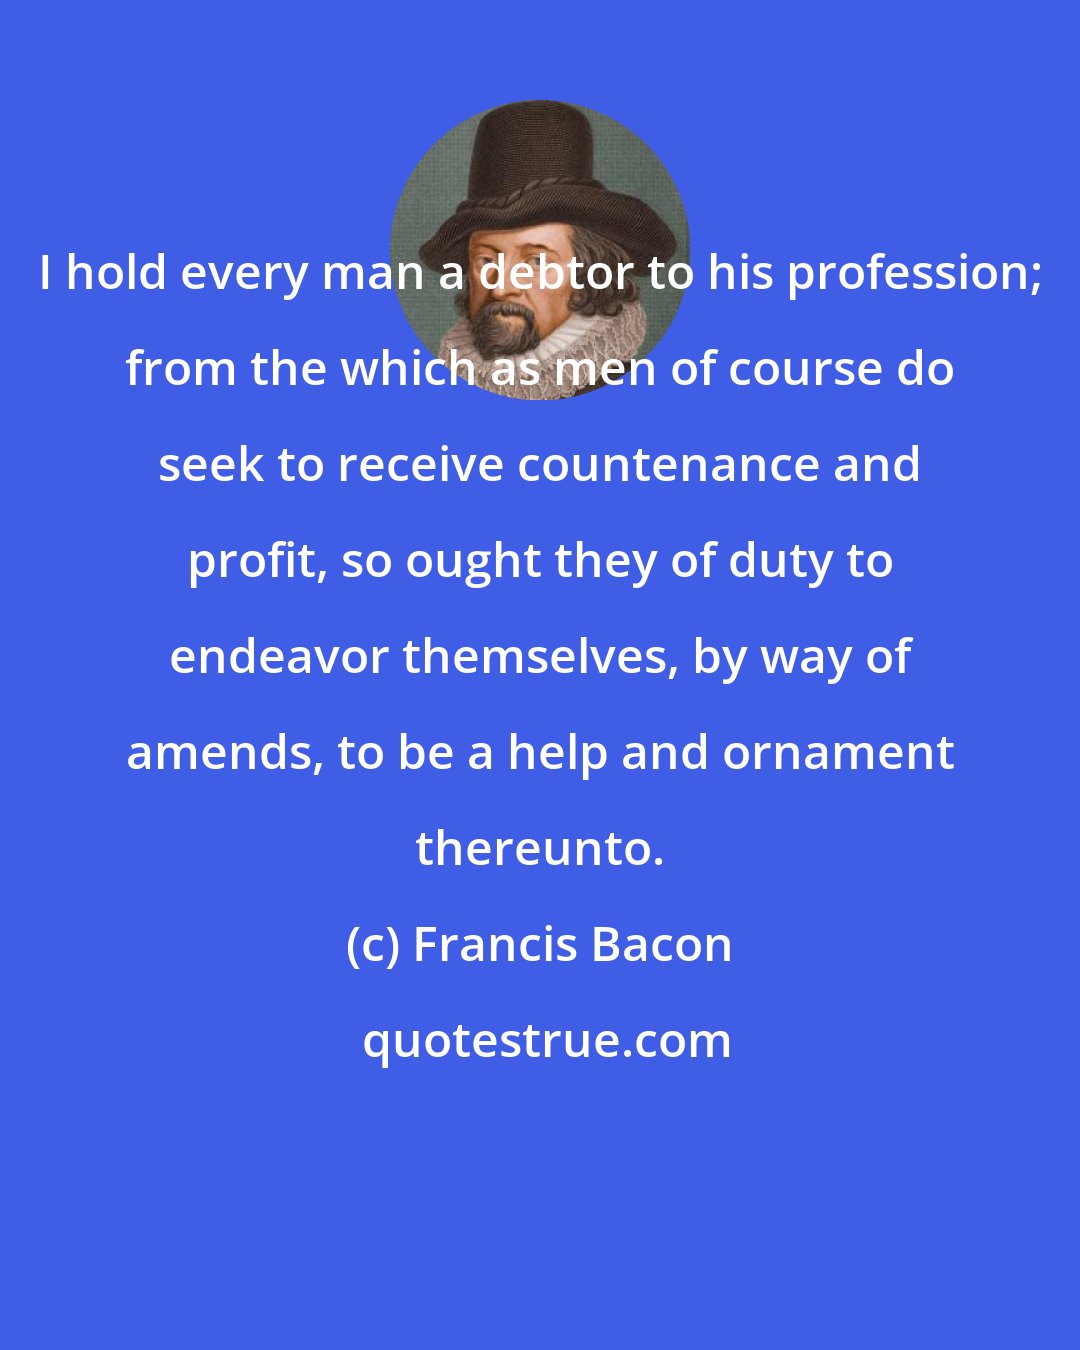 Francis Bacon: I hold every man a debtor to his profession; from the which as men of course do seek to receive countenance and profit, so ought they of duty to endeavor themselves, by way of amends, to be a help and ornament thereunto.